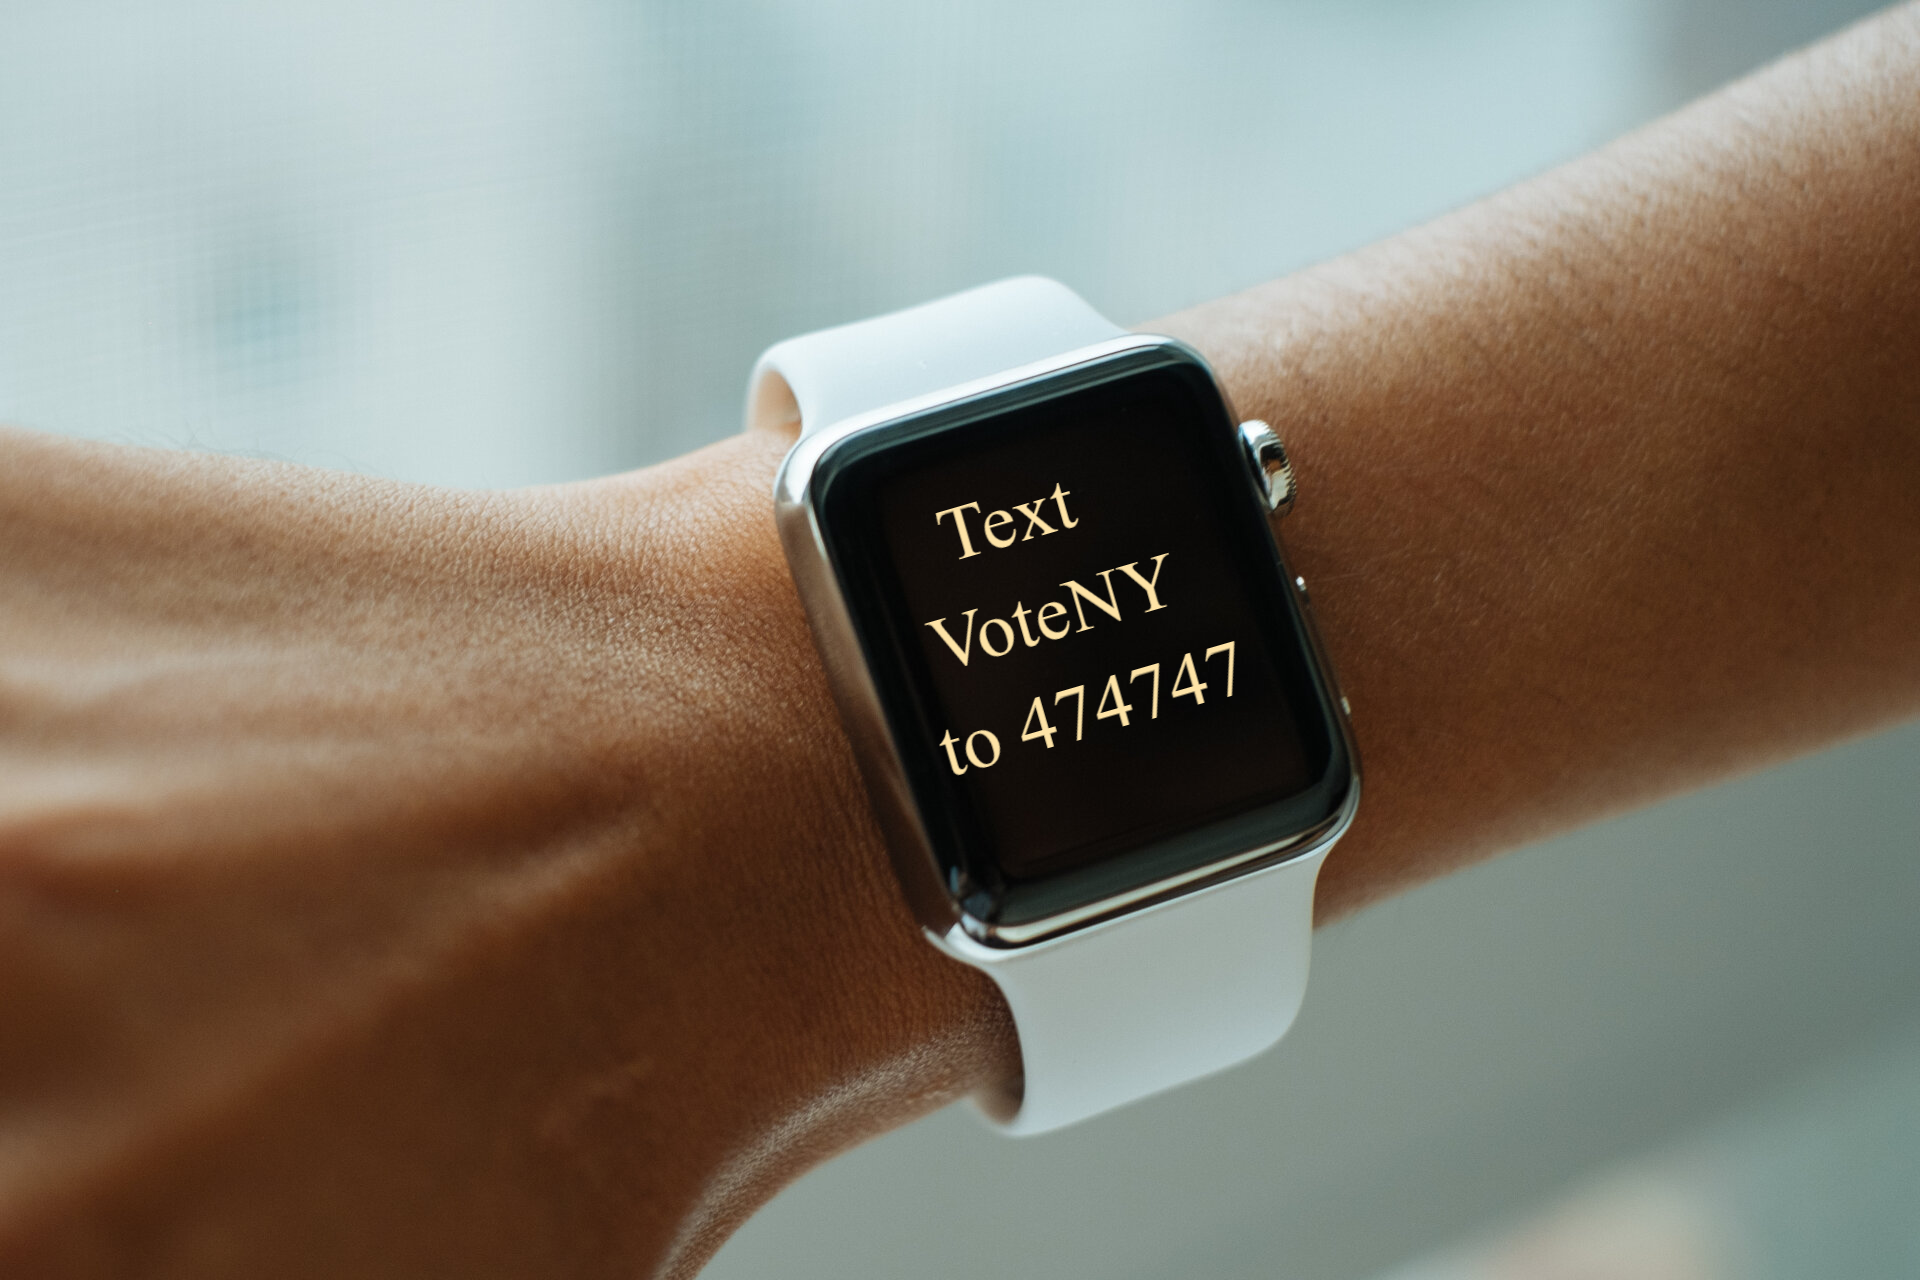 Smart watch with the words Text VoteNY to 474747